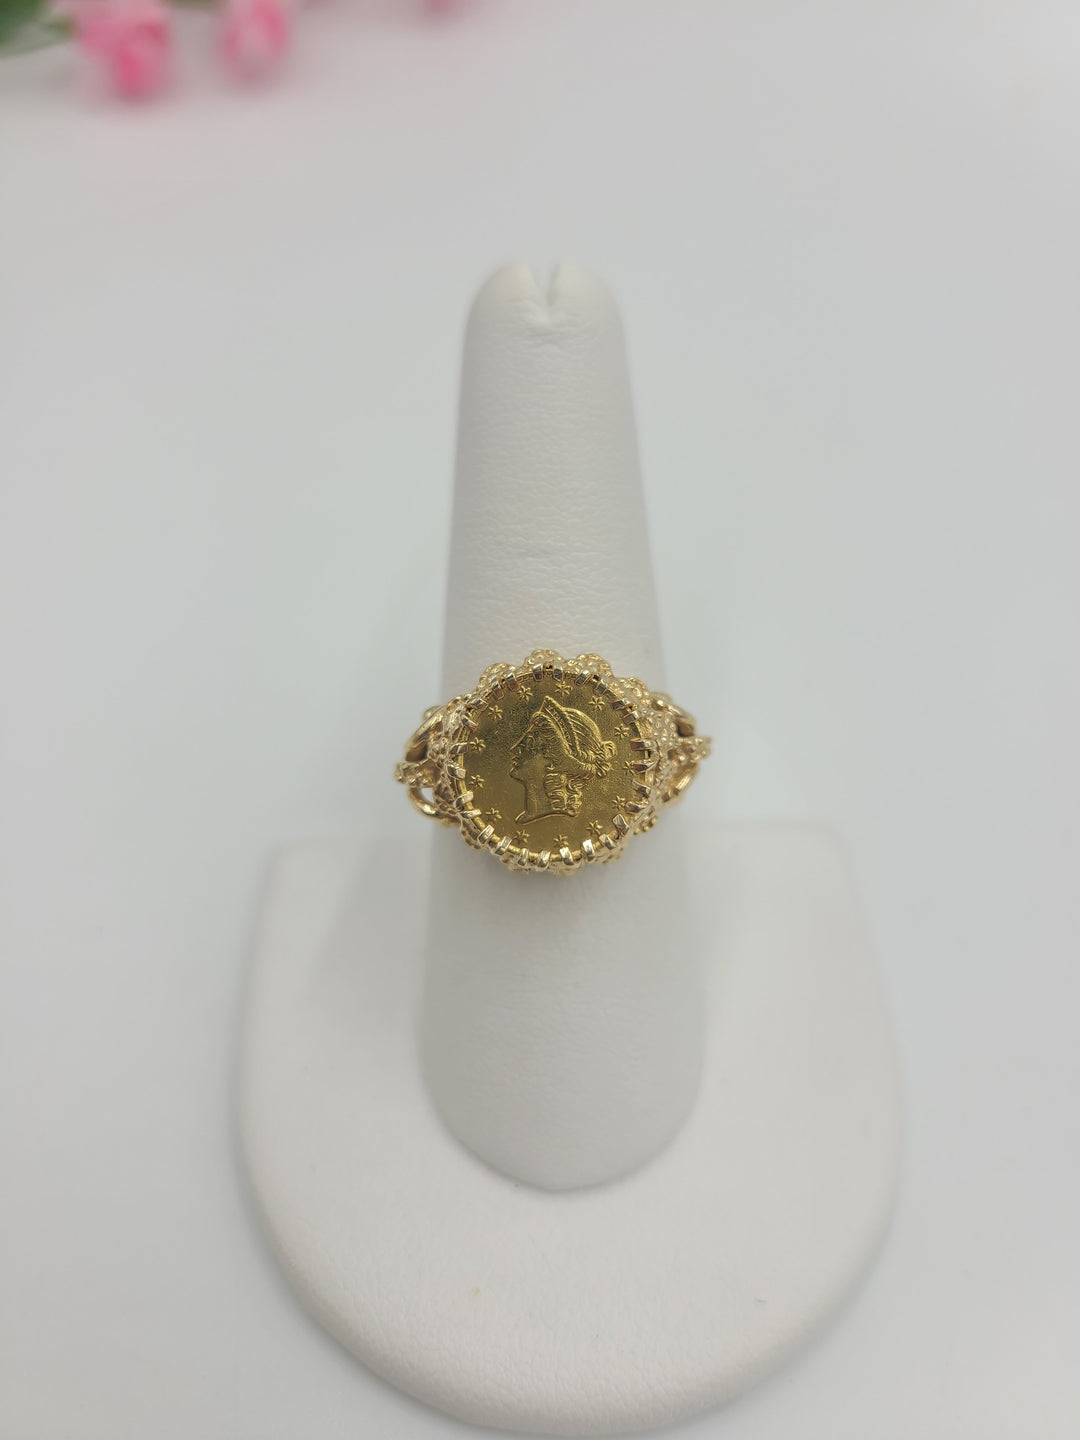 k709 Vintage Unisex 10kt Yellow Gold 1849 $1 Coin Ring